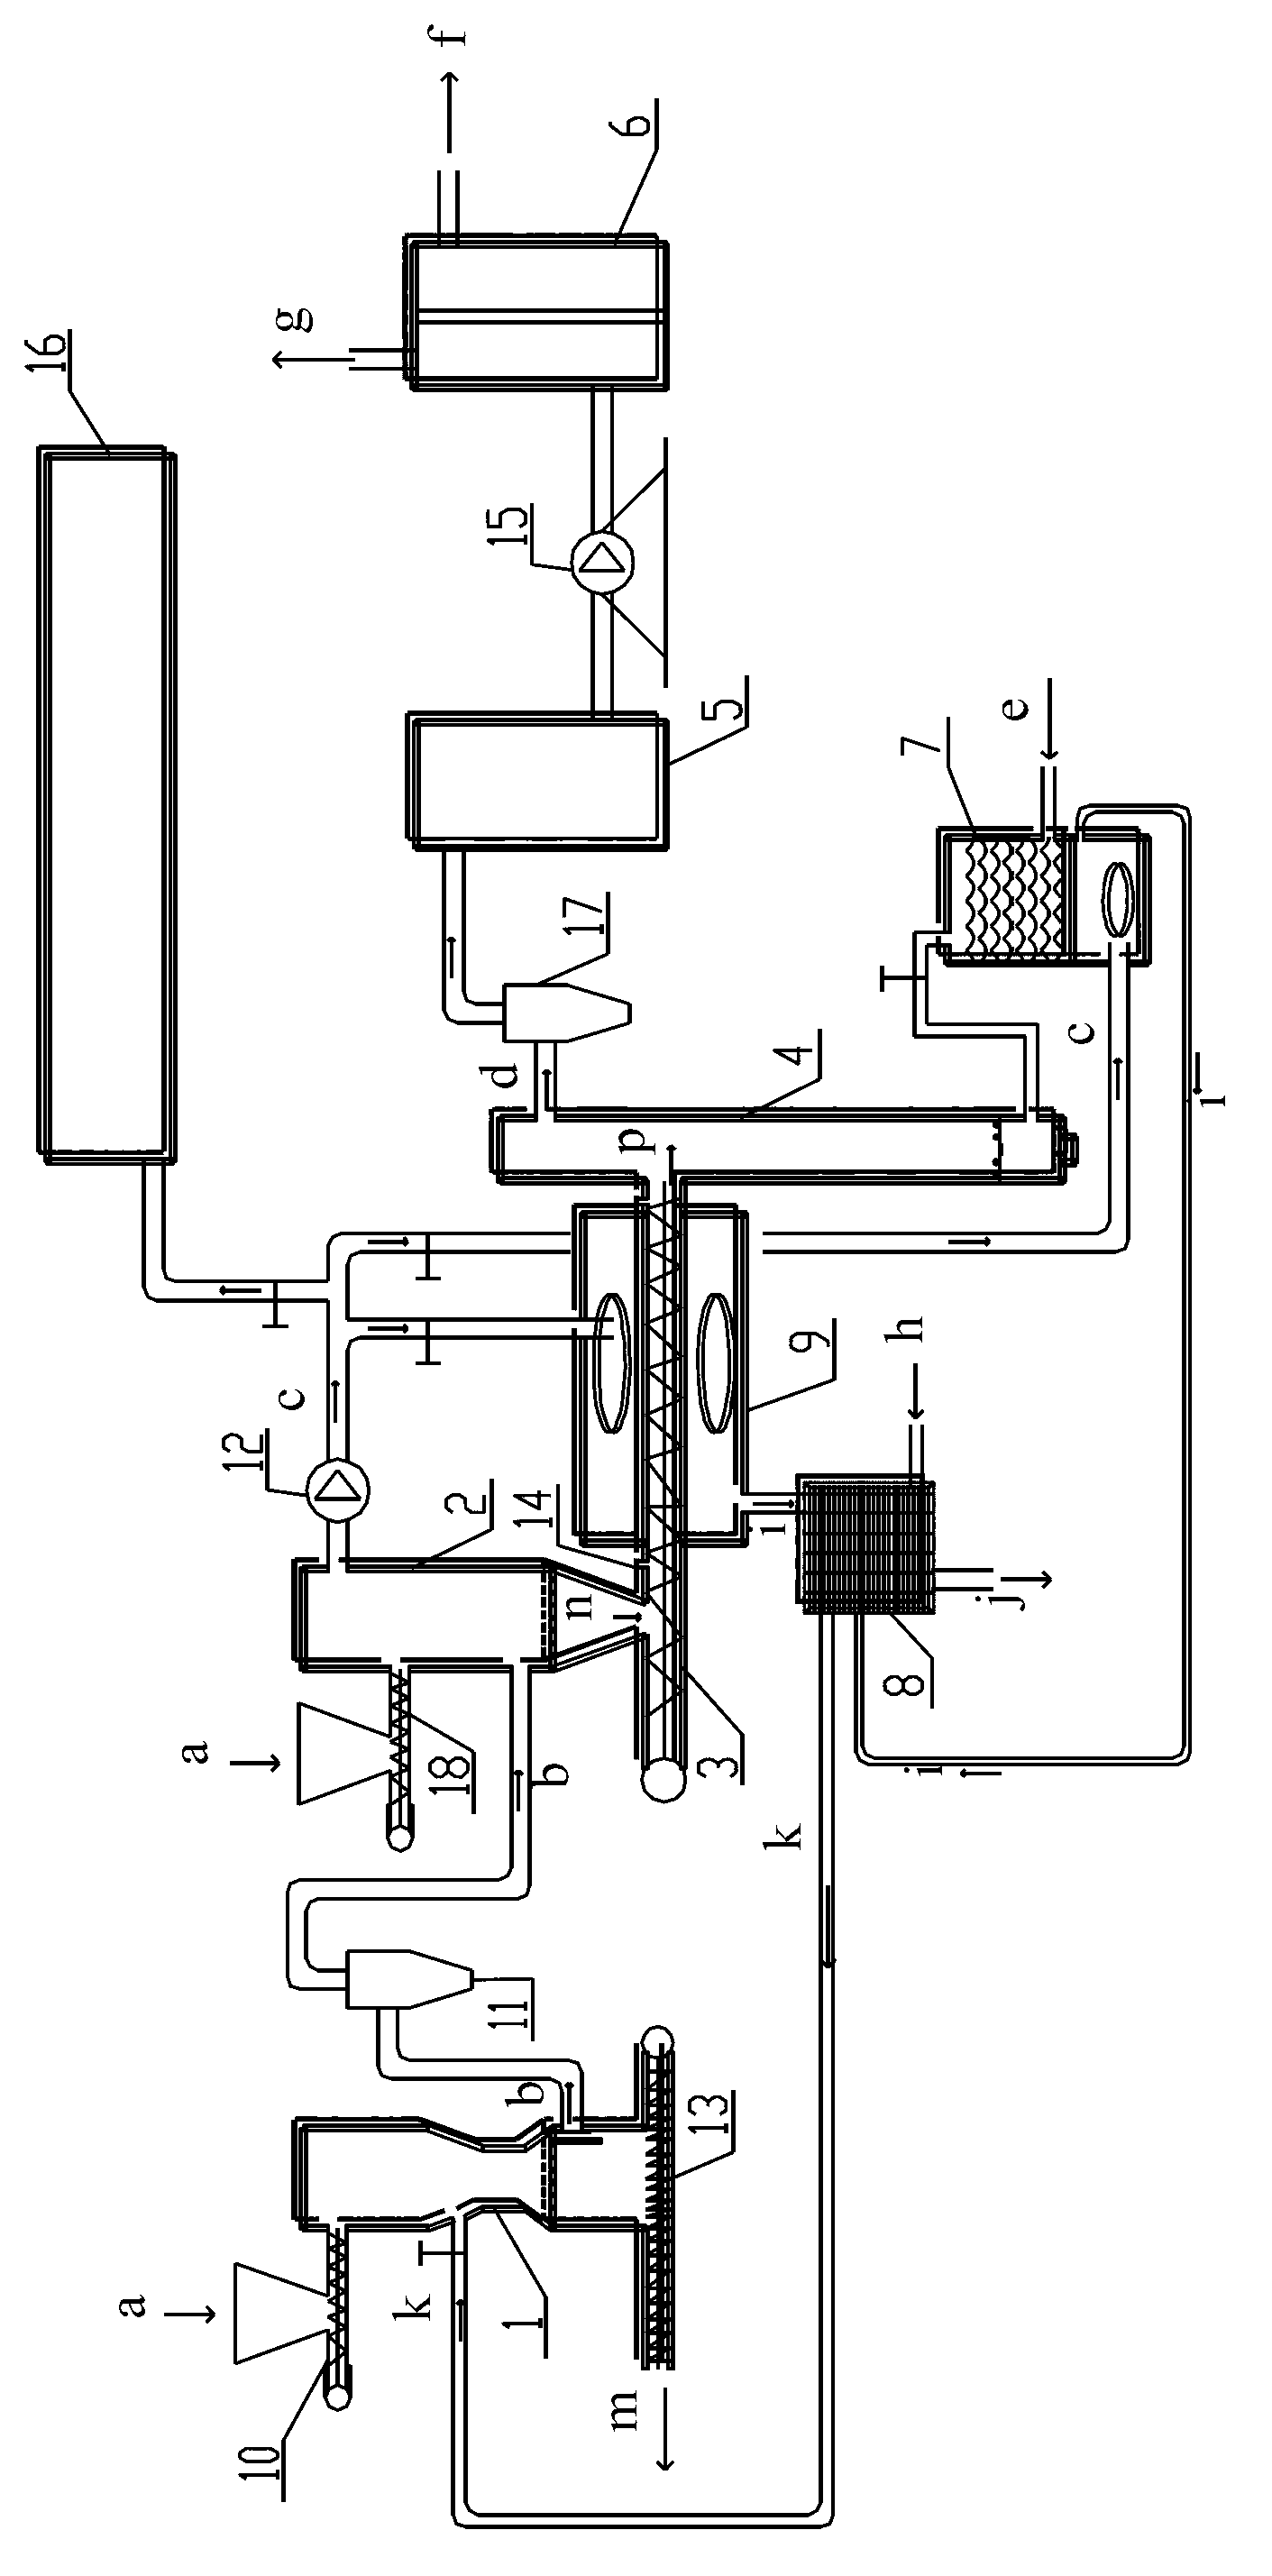 Method and device for preparing high-purity hydrogen from biomass